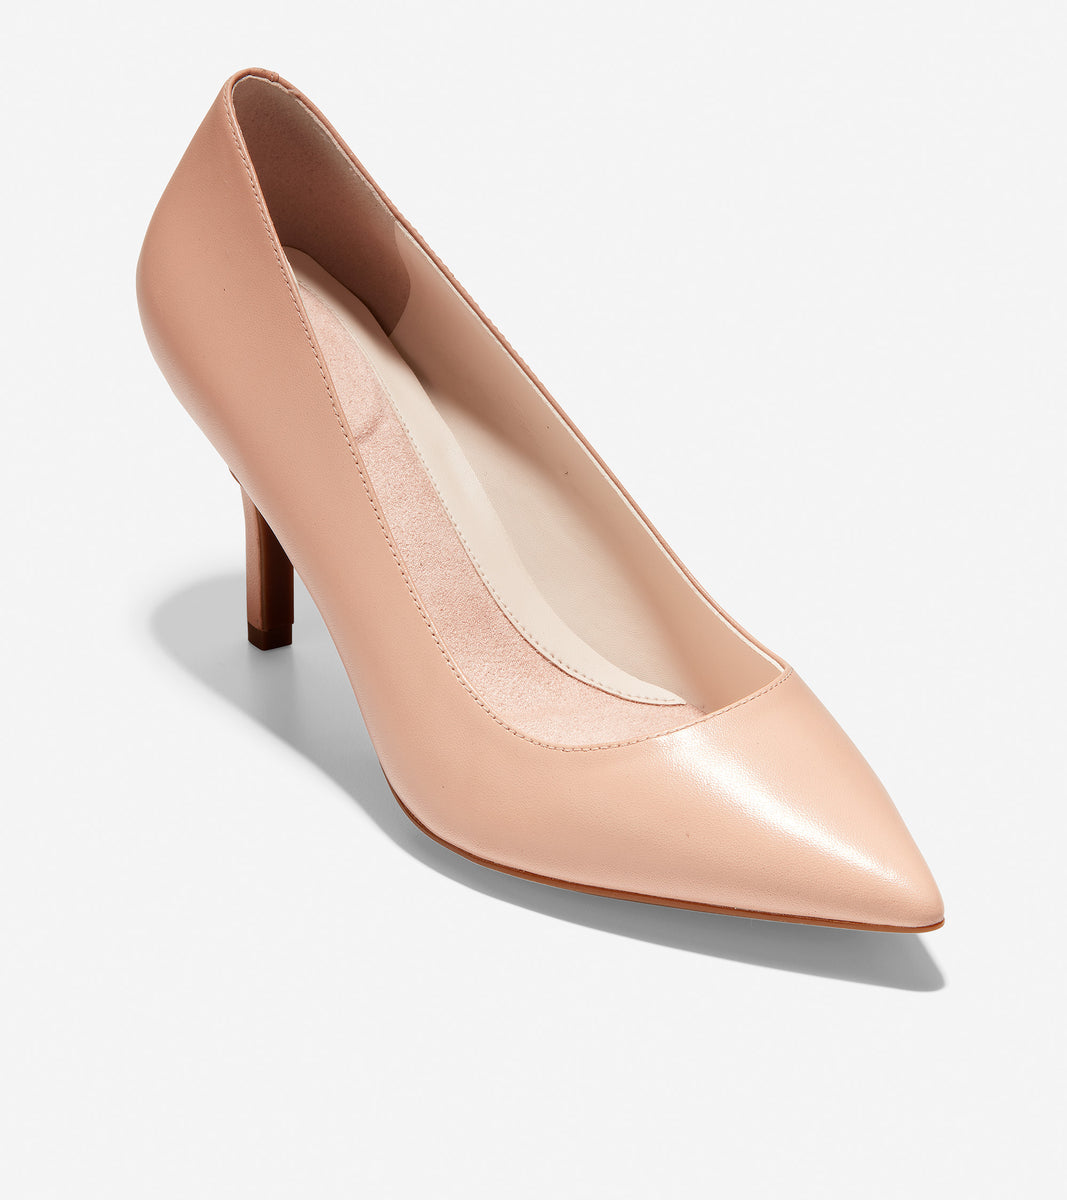 ColeHaan-The Go-To Stiletto Pump-w17536-Mahogany Rose Leather